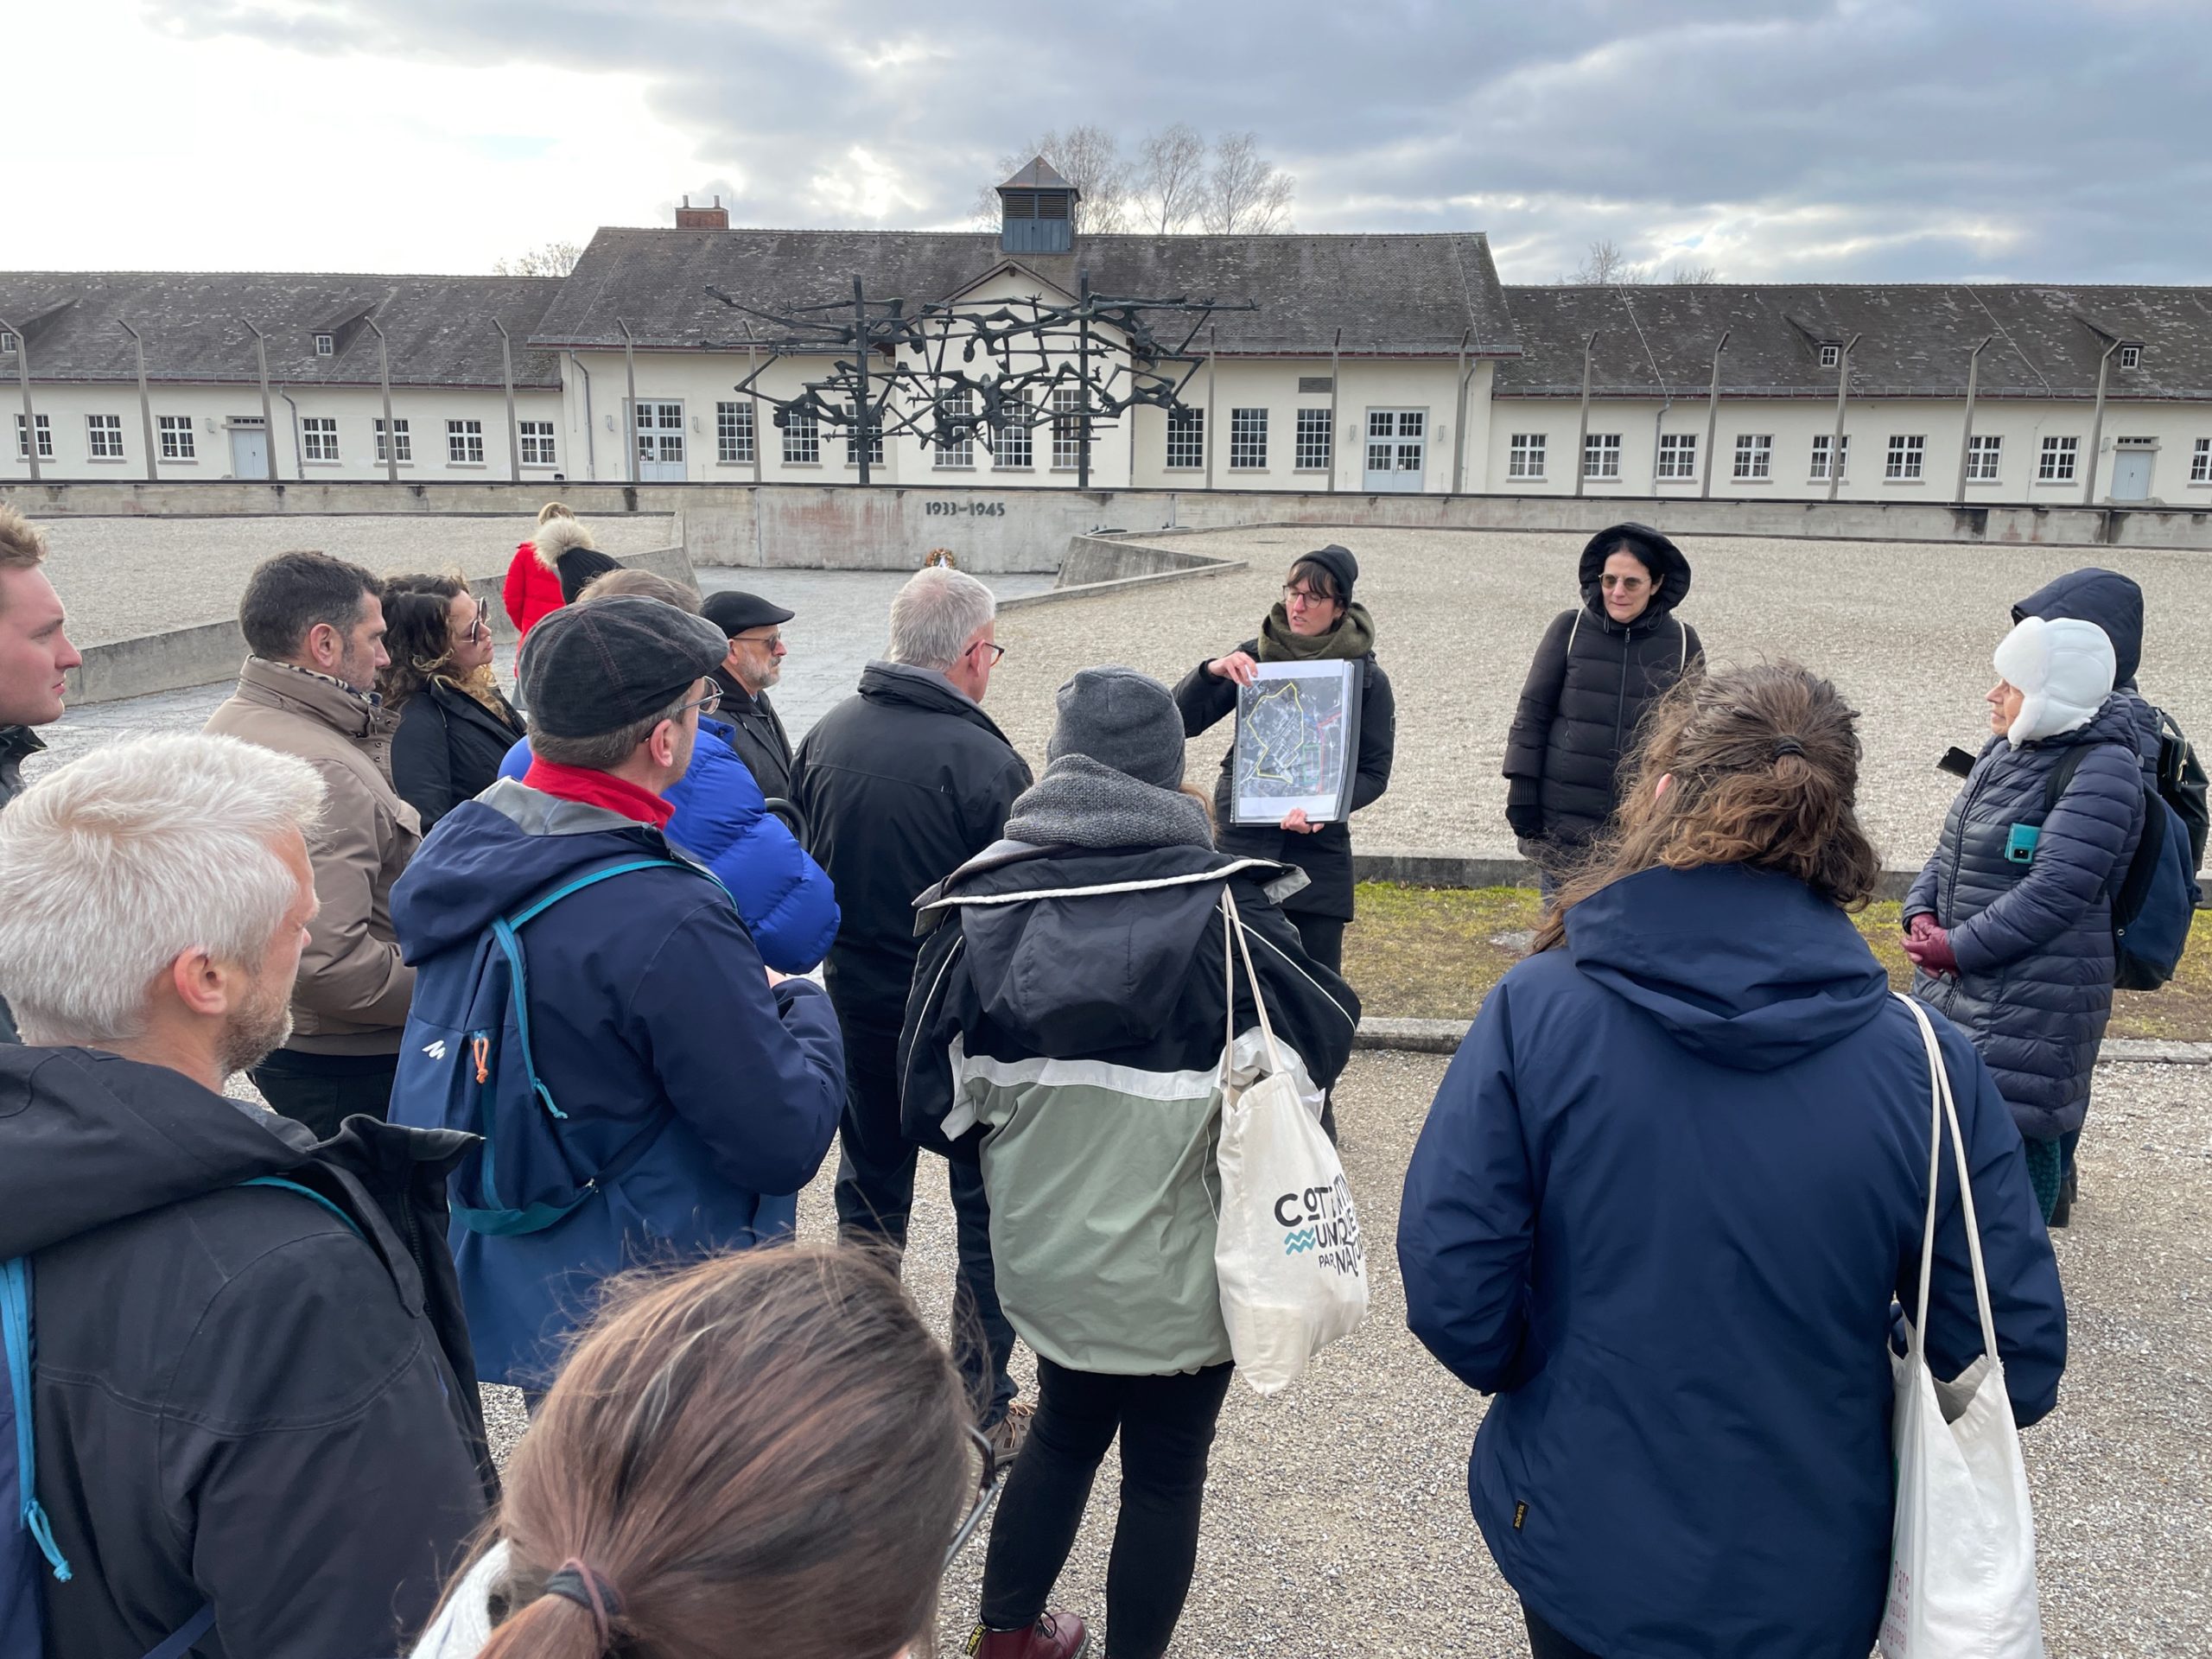 International guides met in Dachau for a workshop part of the Persecution through their Eyes project